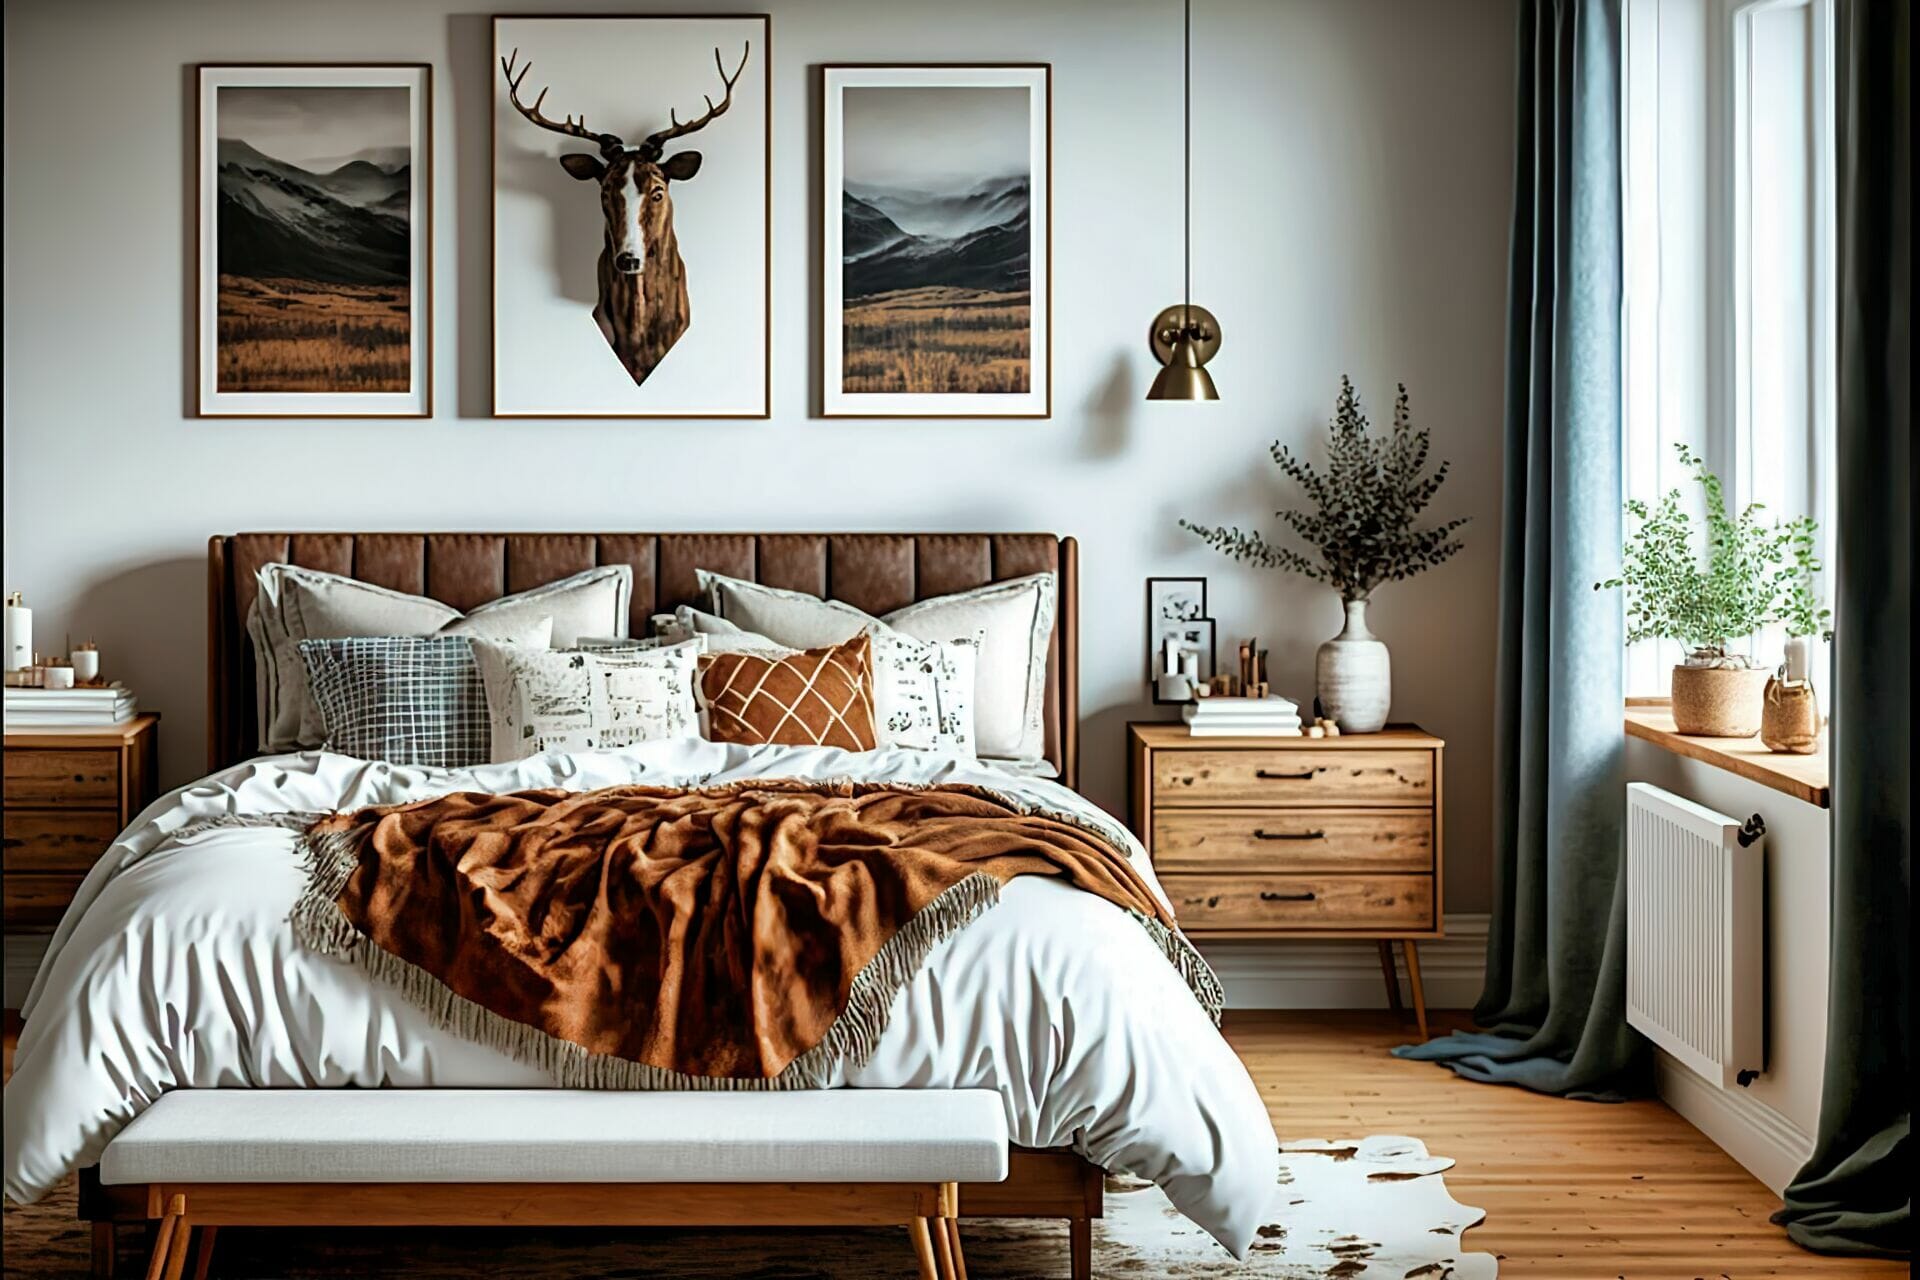 A Scandinavian Style Bedroom With Wood And Leather Accents – This Bedroom Is Decorated With A Mix Of Rustic And Refined Elements. The Walls Are A Light Grey, While The Bed Frame And Nightstand Are A Dark Wood. To Complete The Look, A White Leather Rug Lies On The Floor, And Art Prints With Wood And Leather Colors Hang On The Walls.